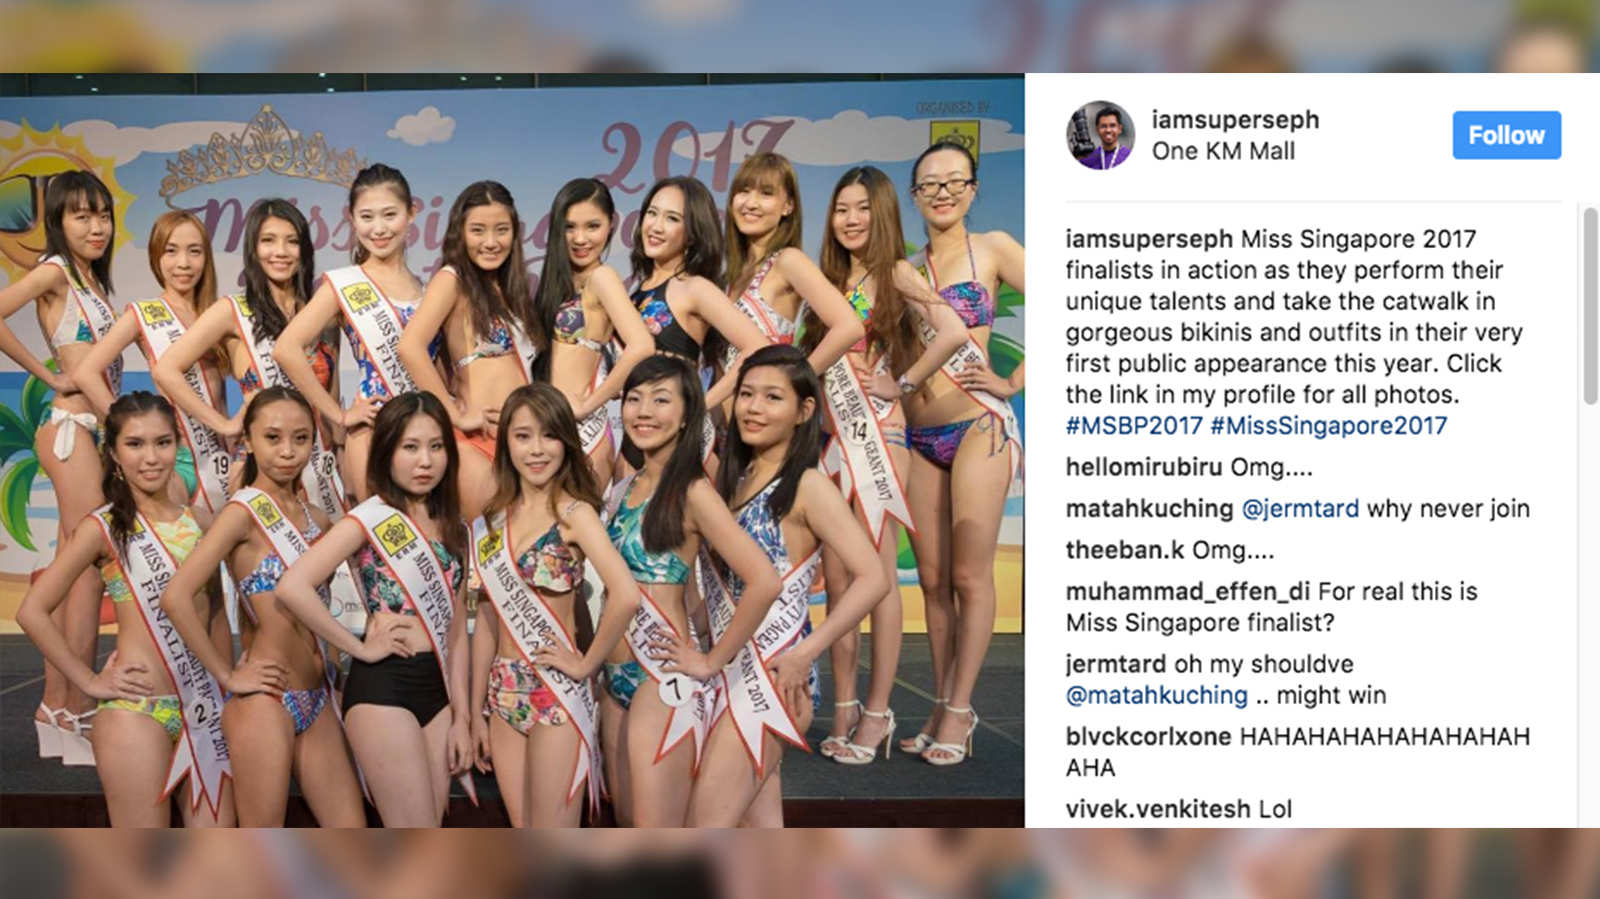 Give beauty a chance: pageant contestants speak about ugly comments